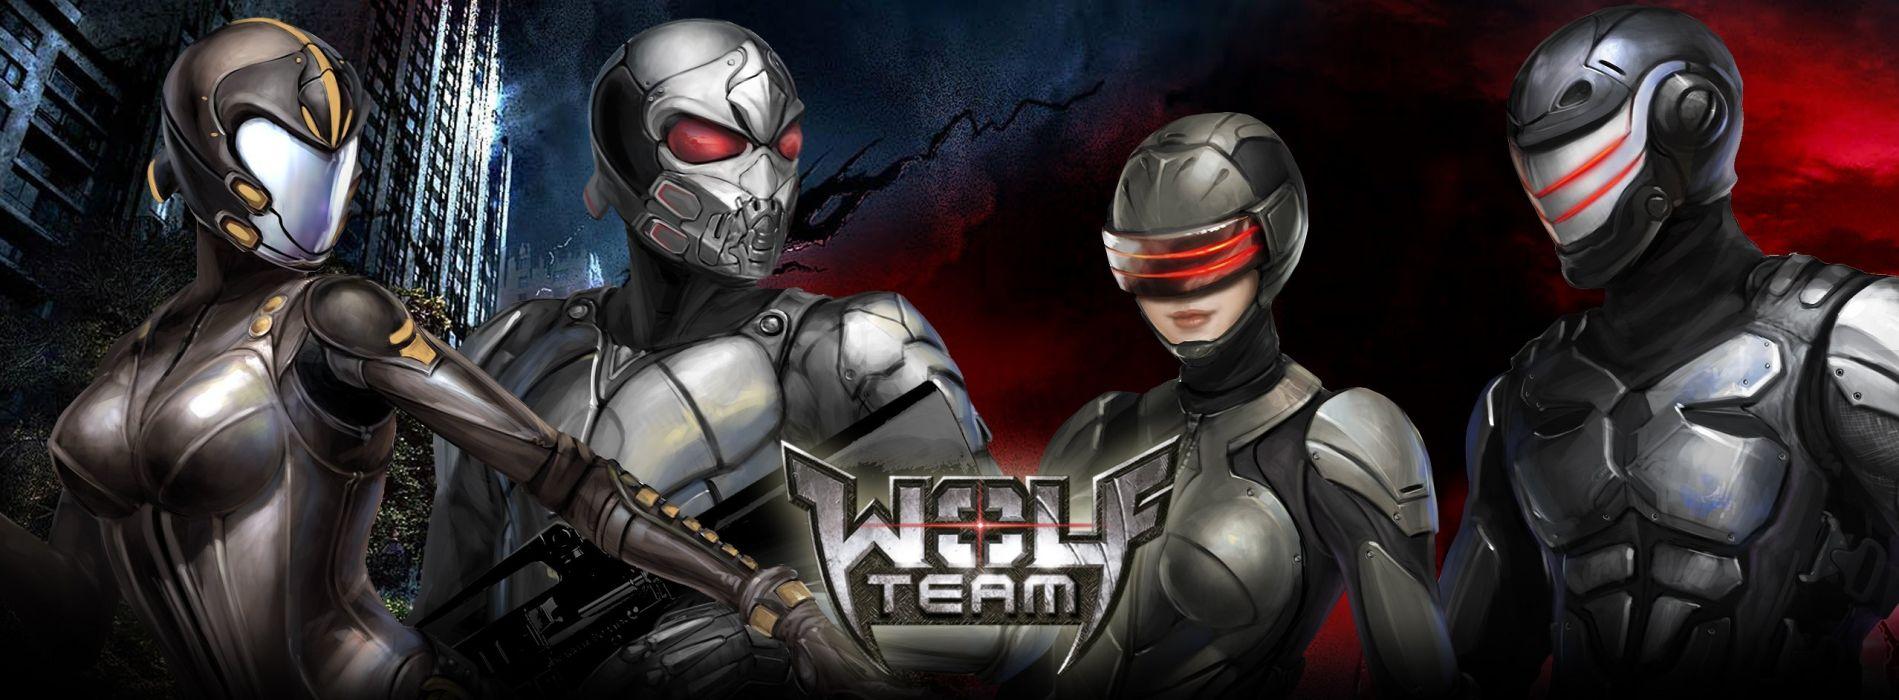 WOLFTEAM shooter fps action fighting fantasy wolf wolves werewolf